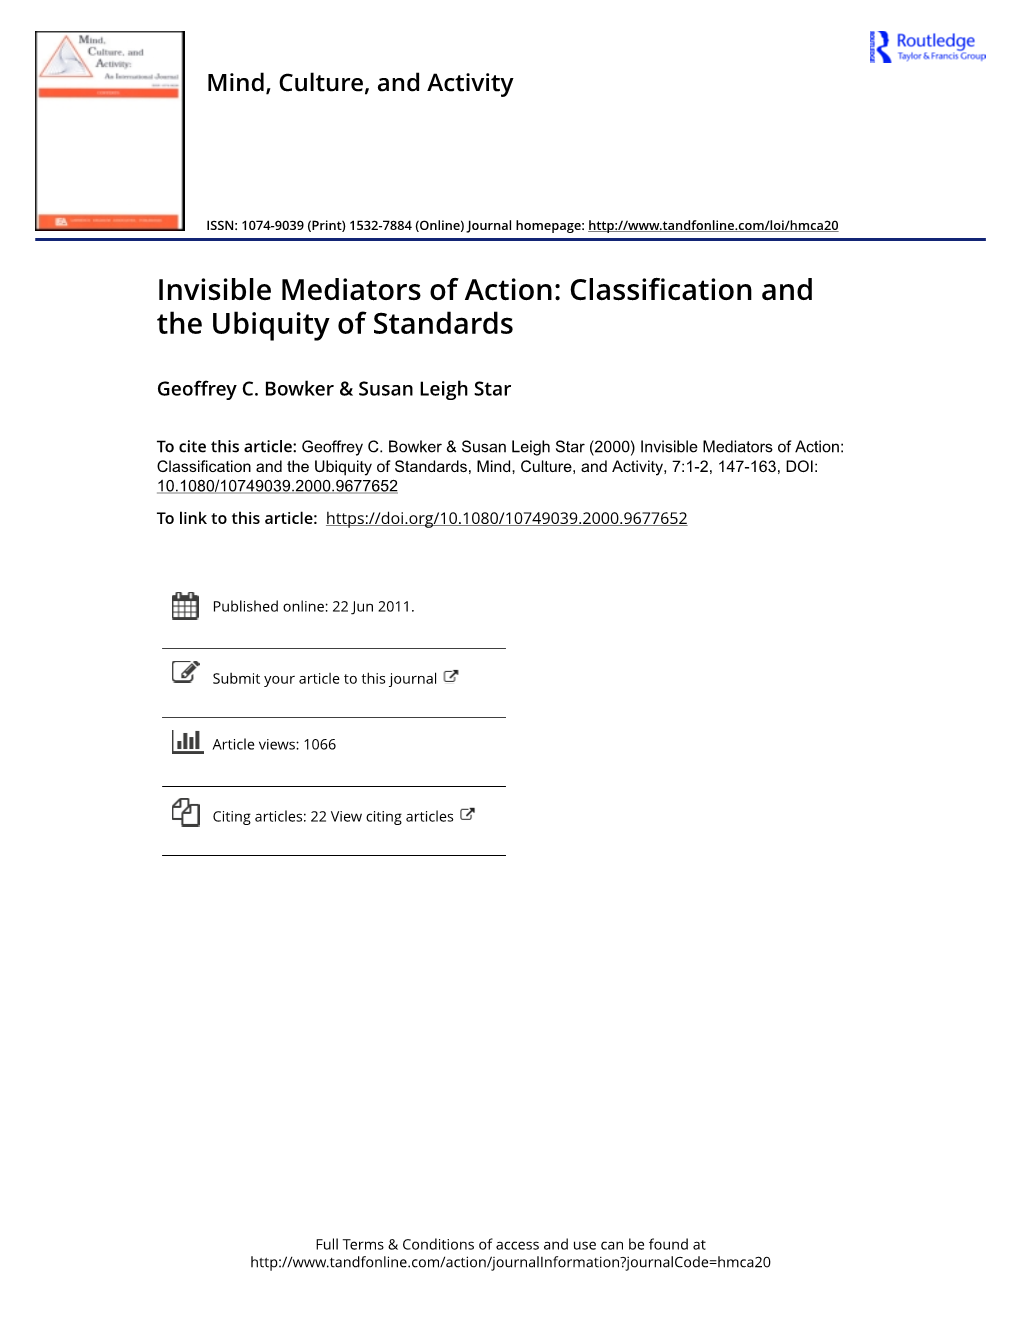 Invisible Mediators of Action: Classification and the Ubiquity of Standards